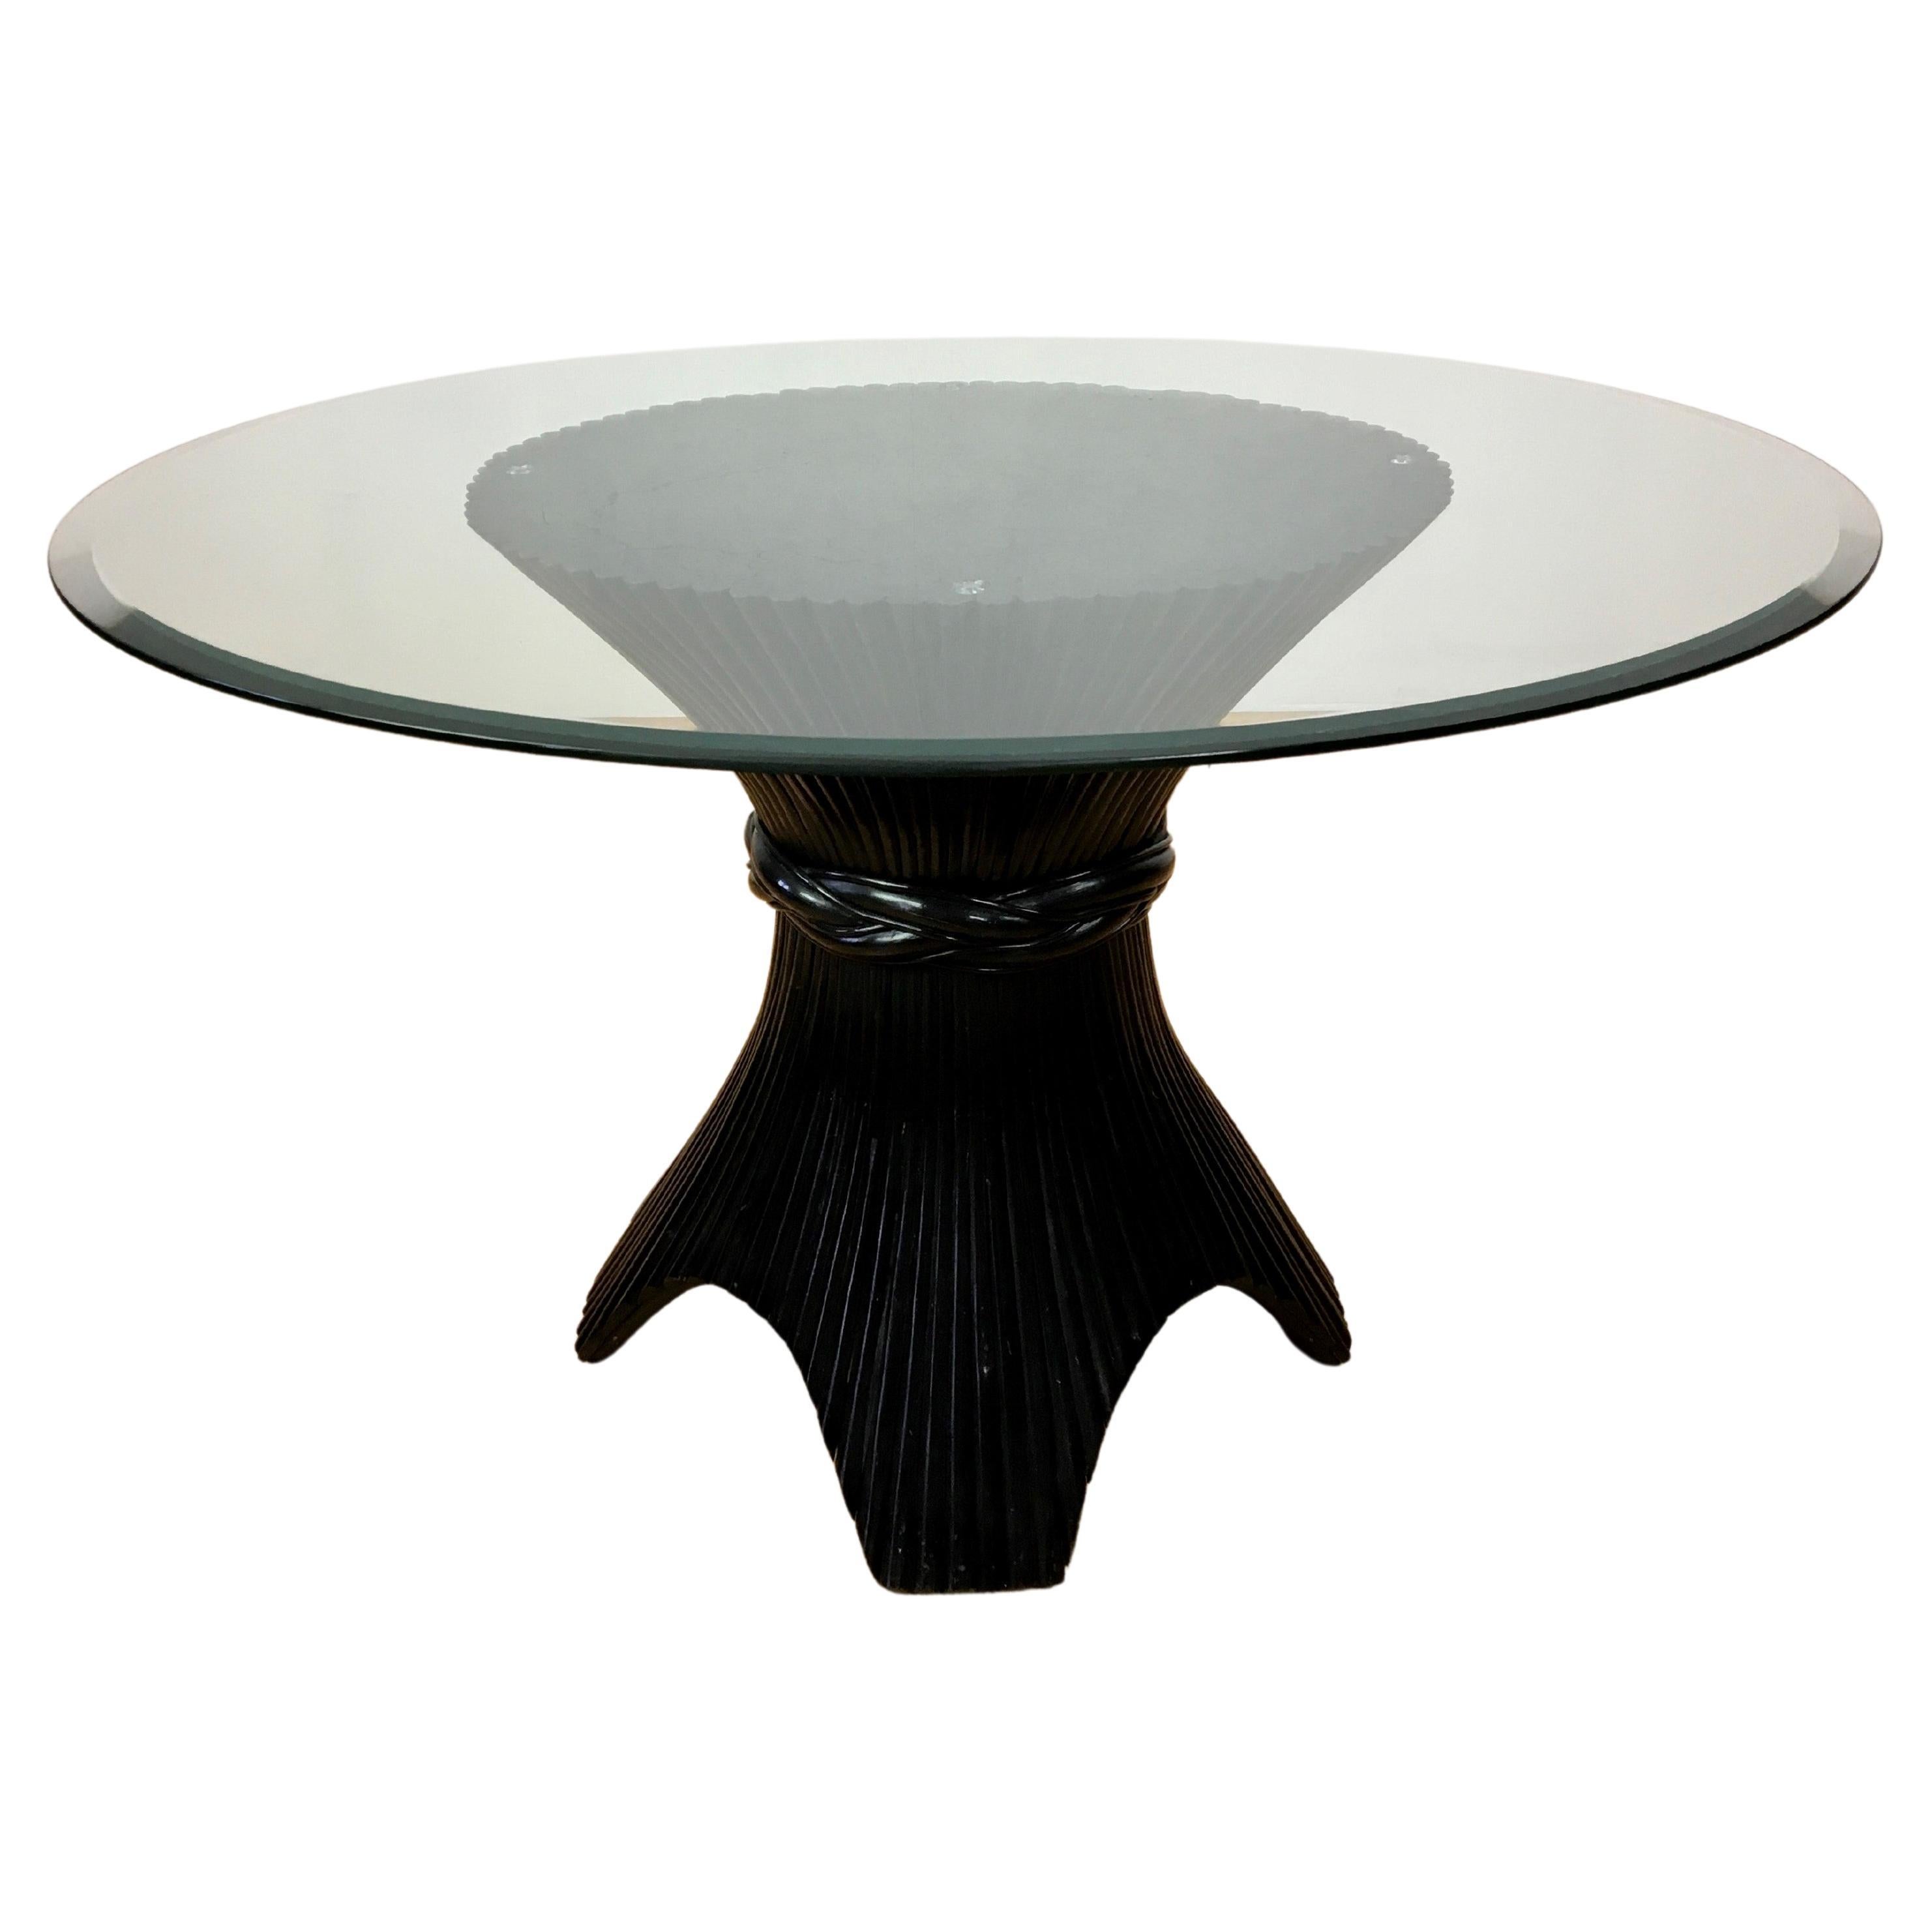 Black Lacquered Rattan Dining Room Table Base for 6